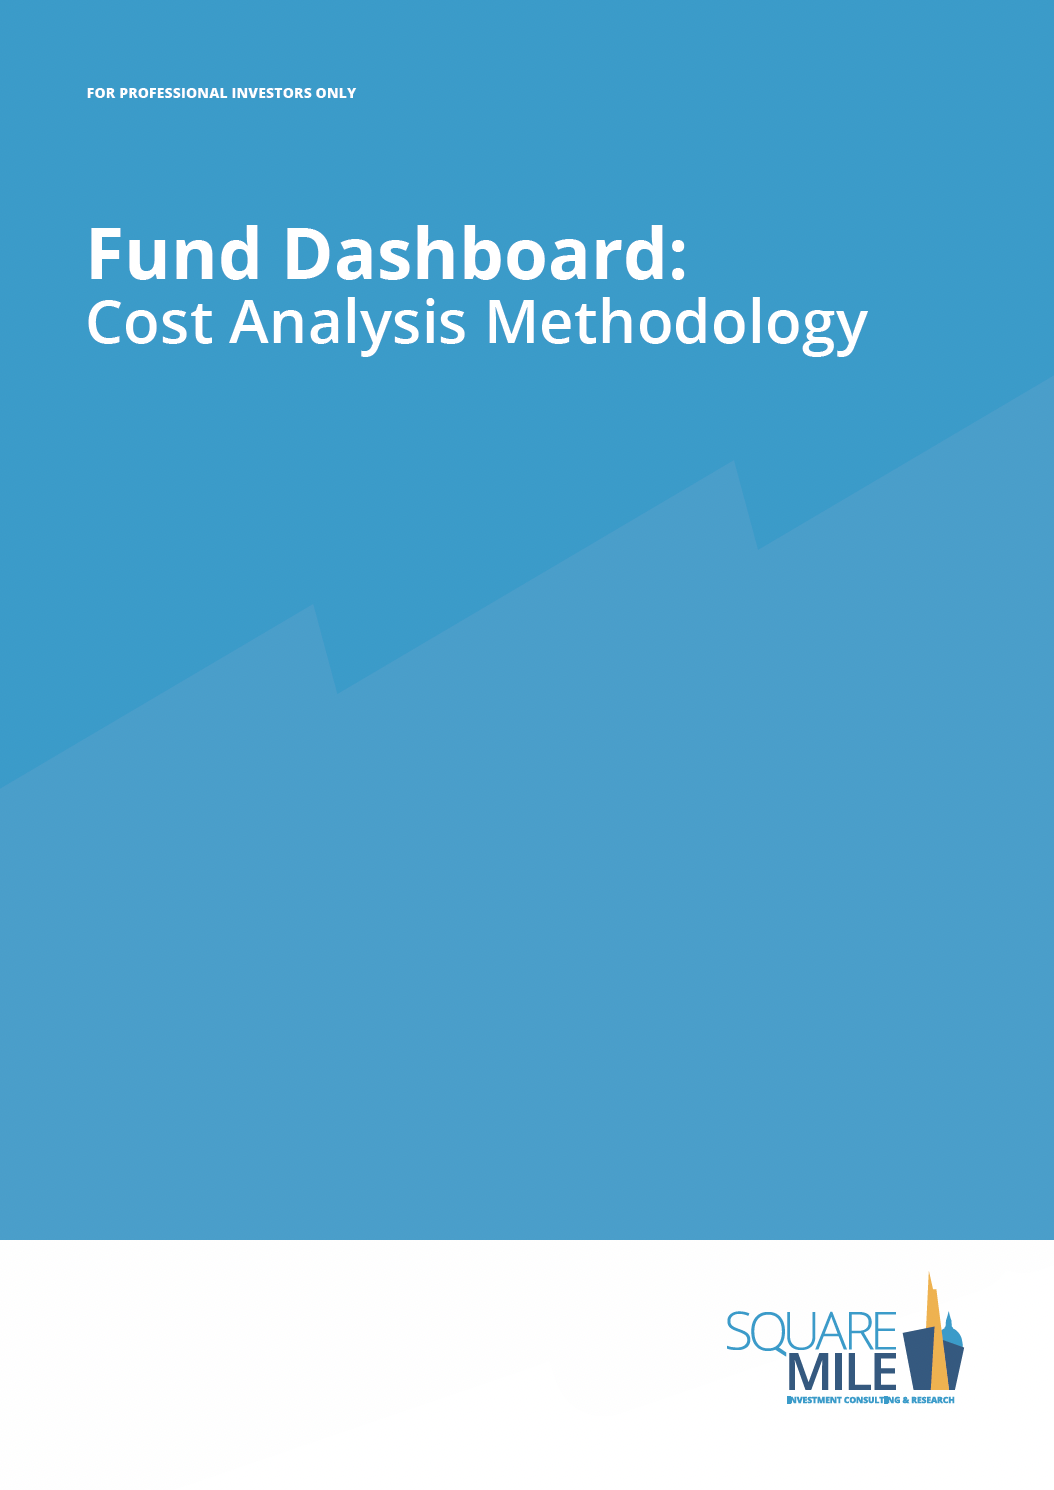 Fund-Dashboard-Cost-Methdology-Image